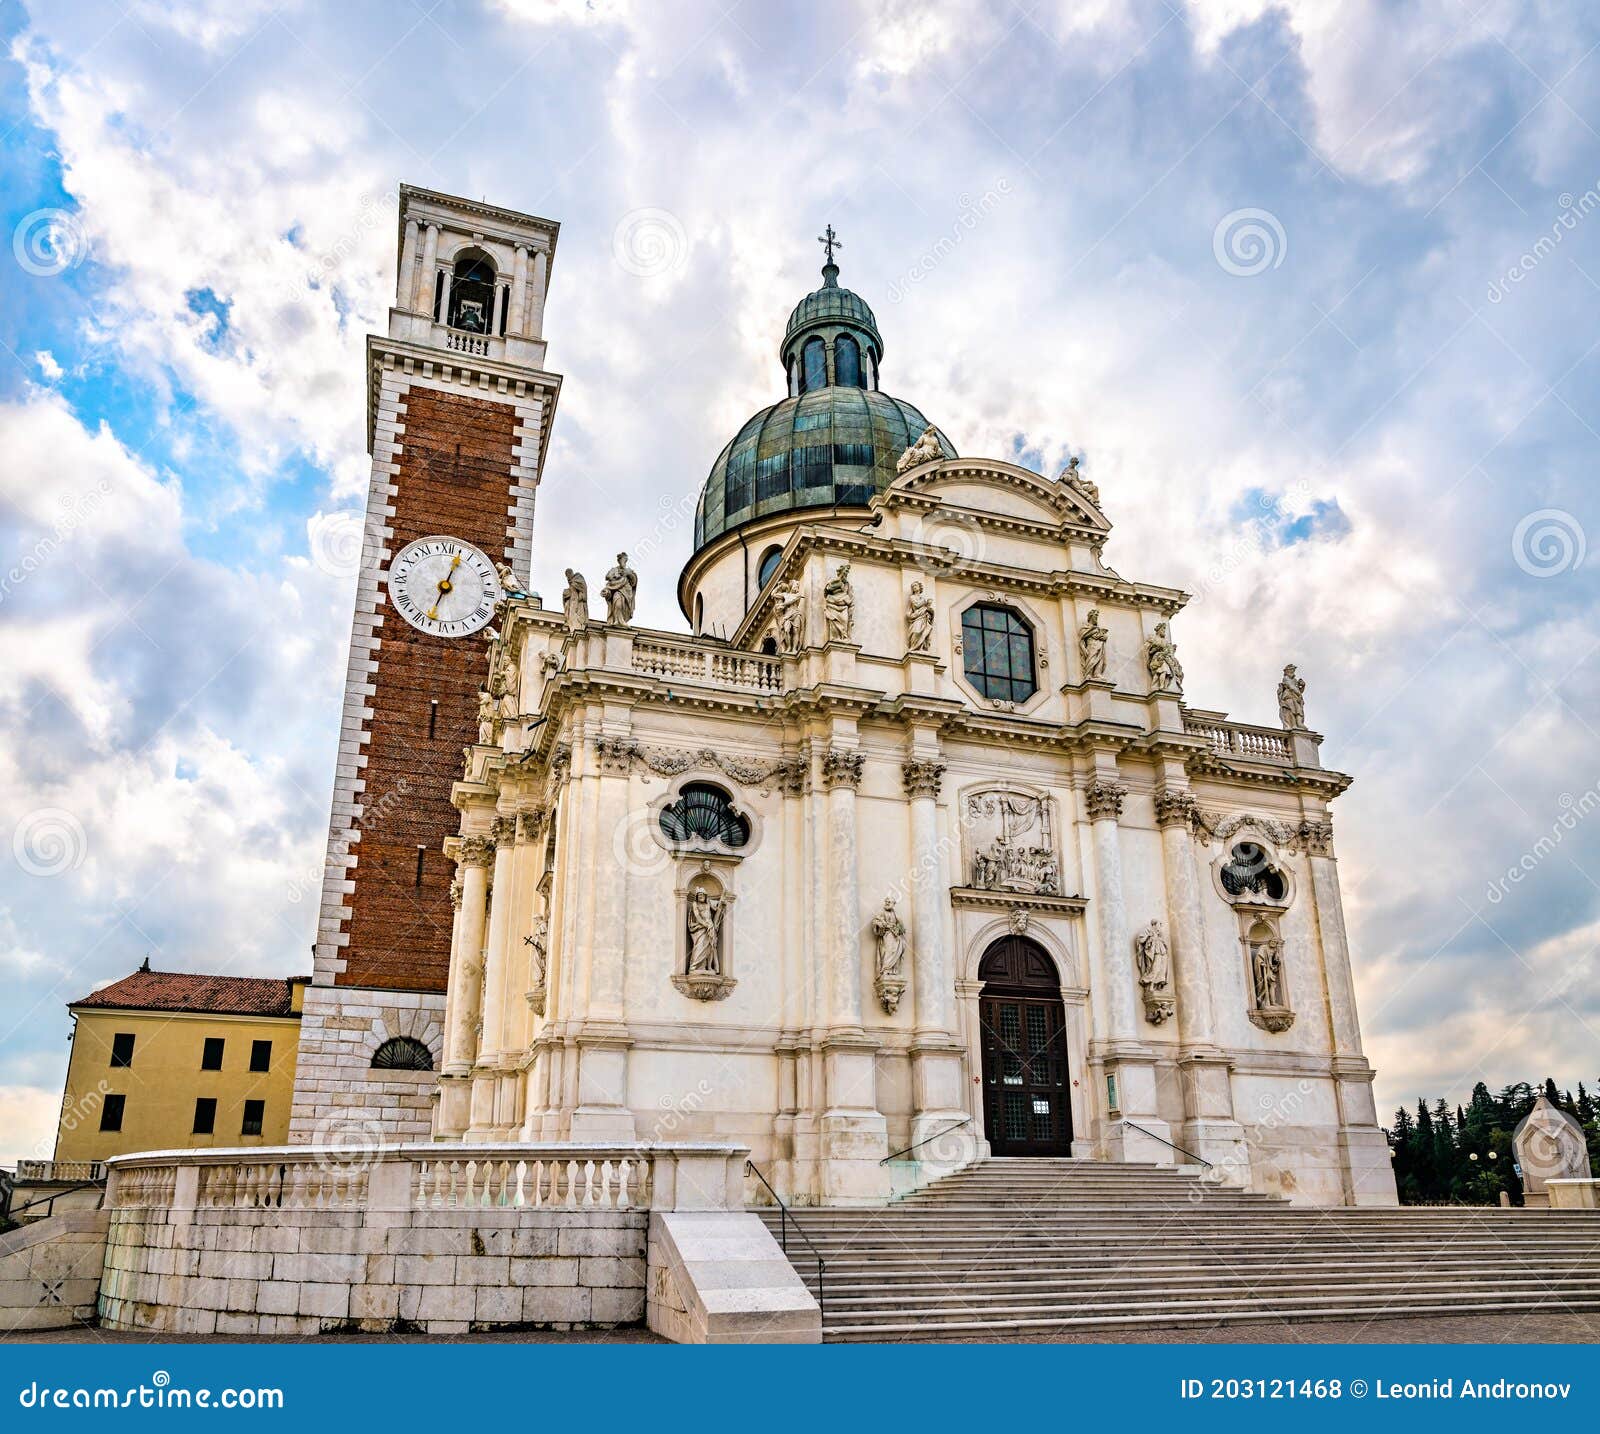 church of st. mary of mount berico in vicenza, italy